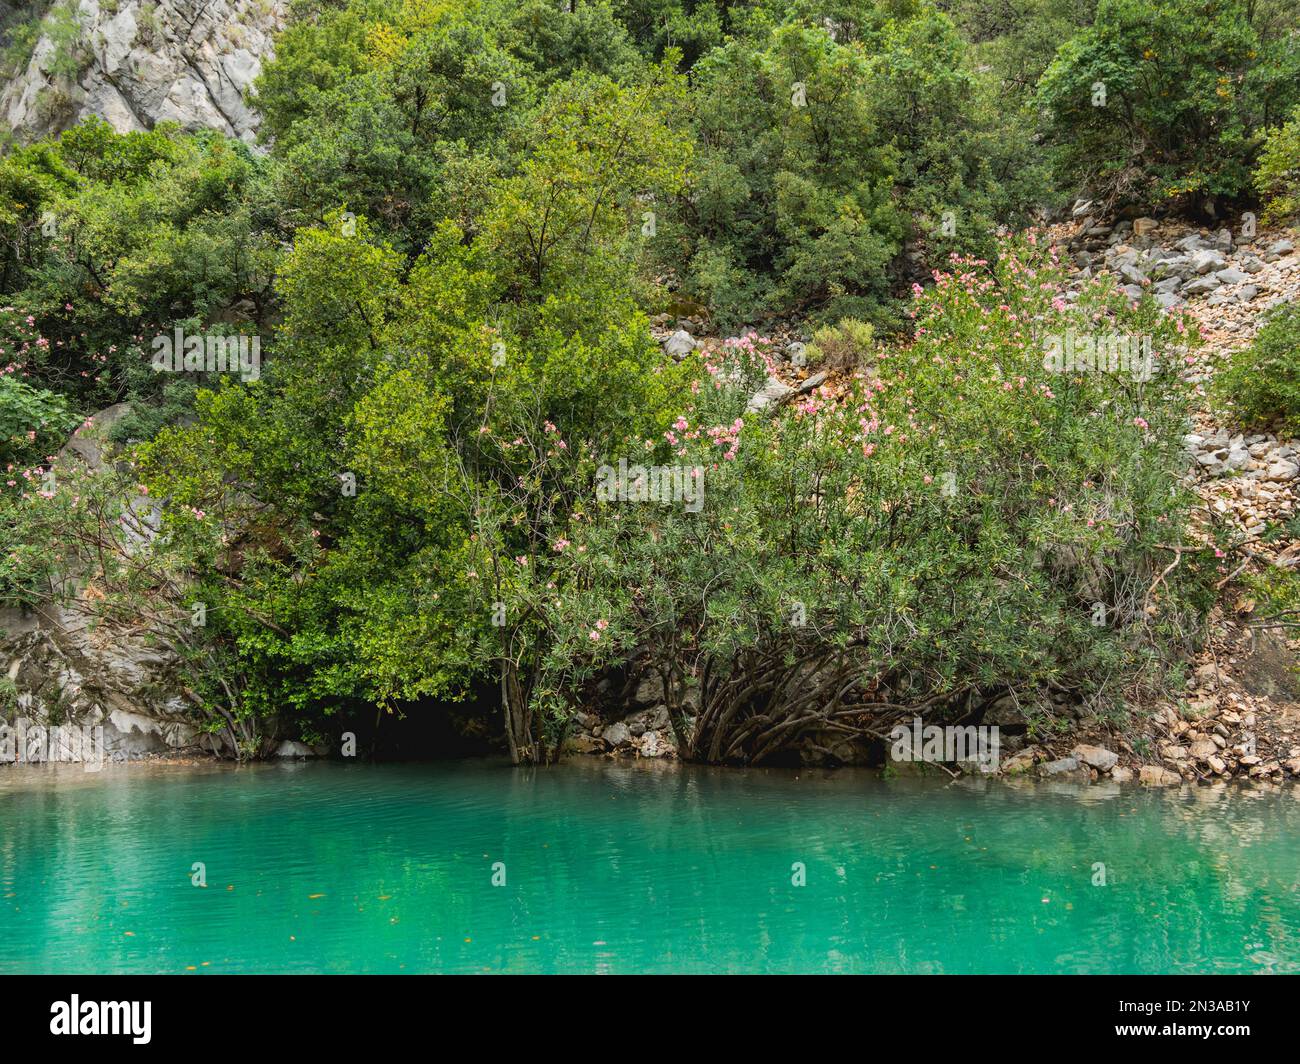 Nerium oleander and trees in turquoise water of river in Goynuk Canyon. Mountain slopes in Beydaglari Coastal National Park. Turkey. Stock Photo